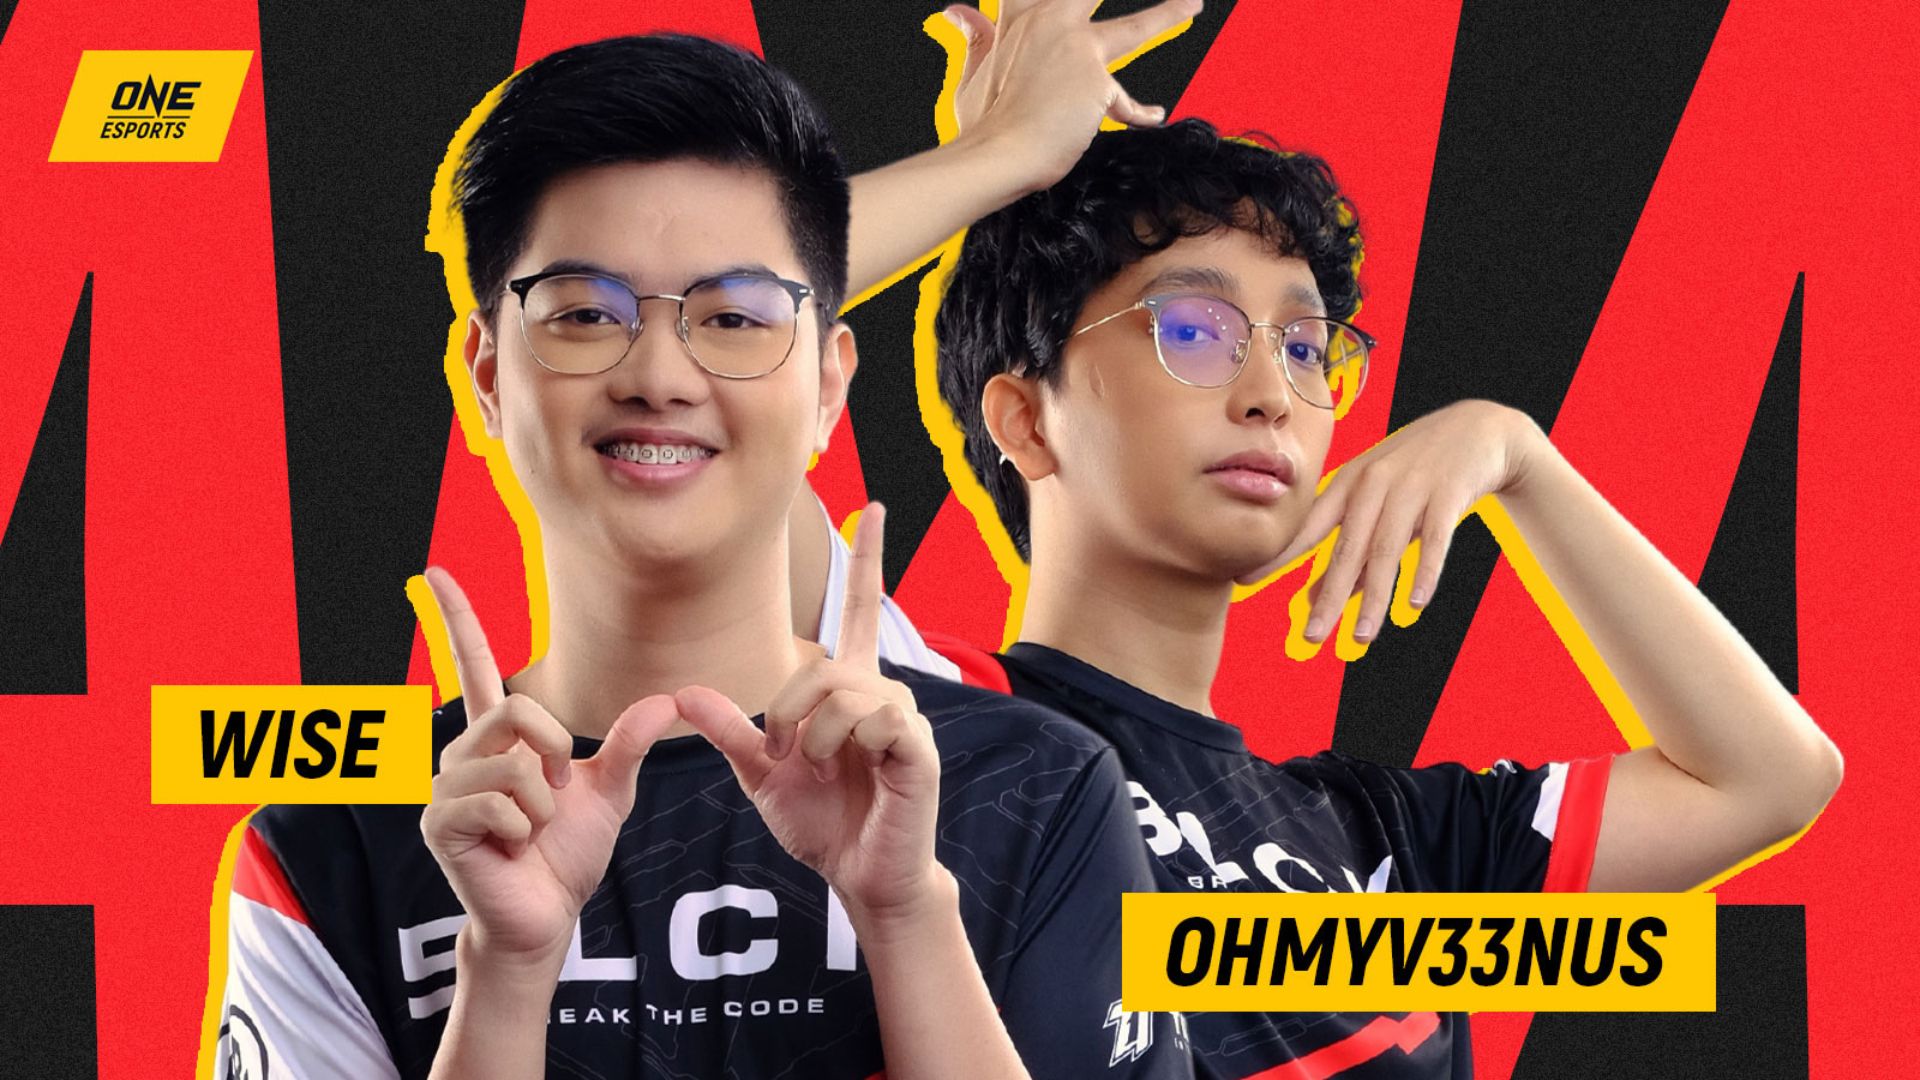 Wise likens OhMyV33nus to this gorgeous hero in an exclusive AMA - ONE Esports